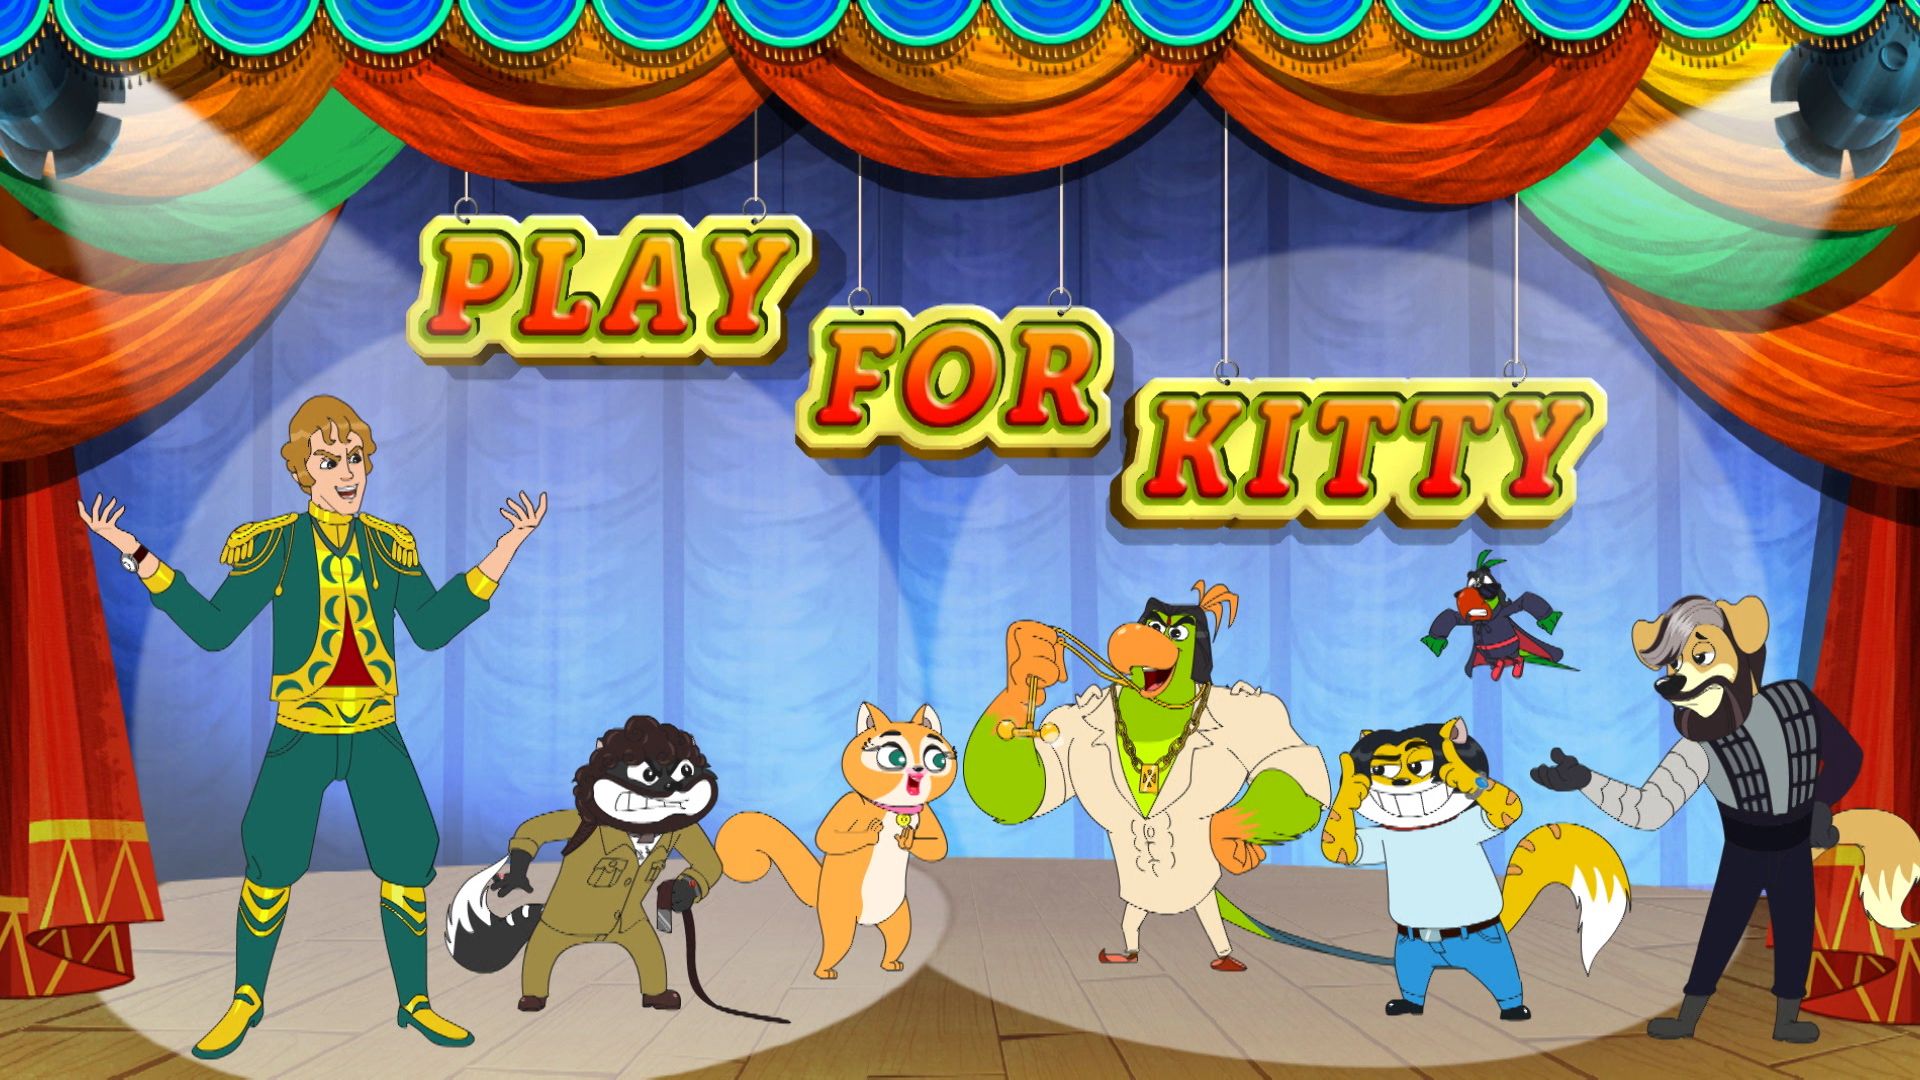 Play For Kitty